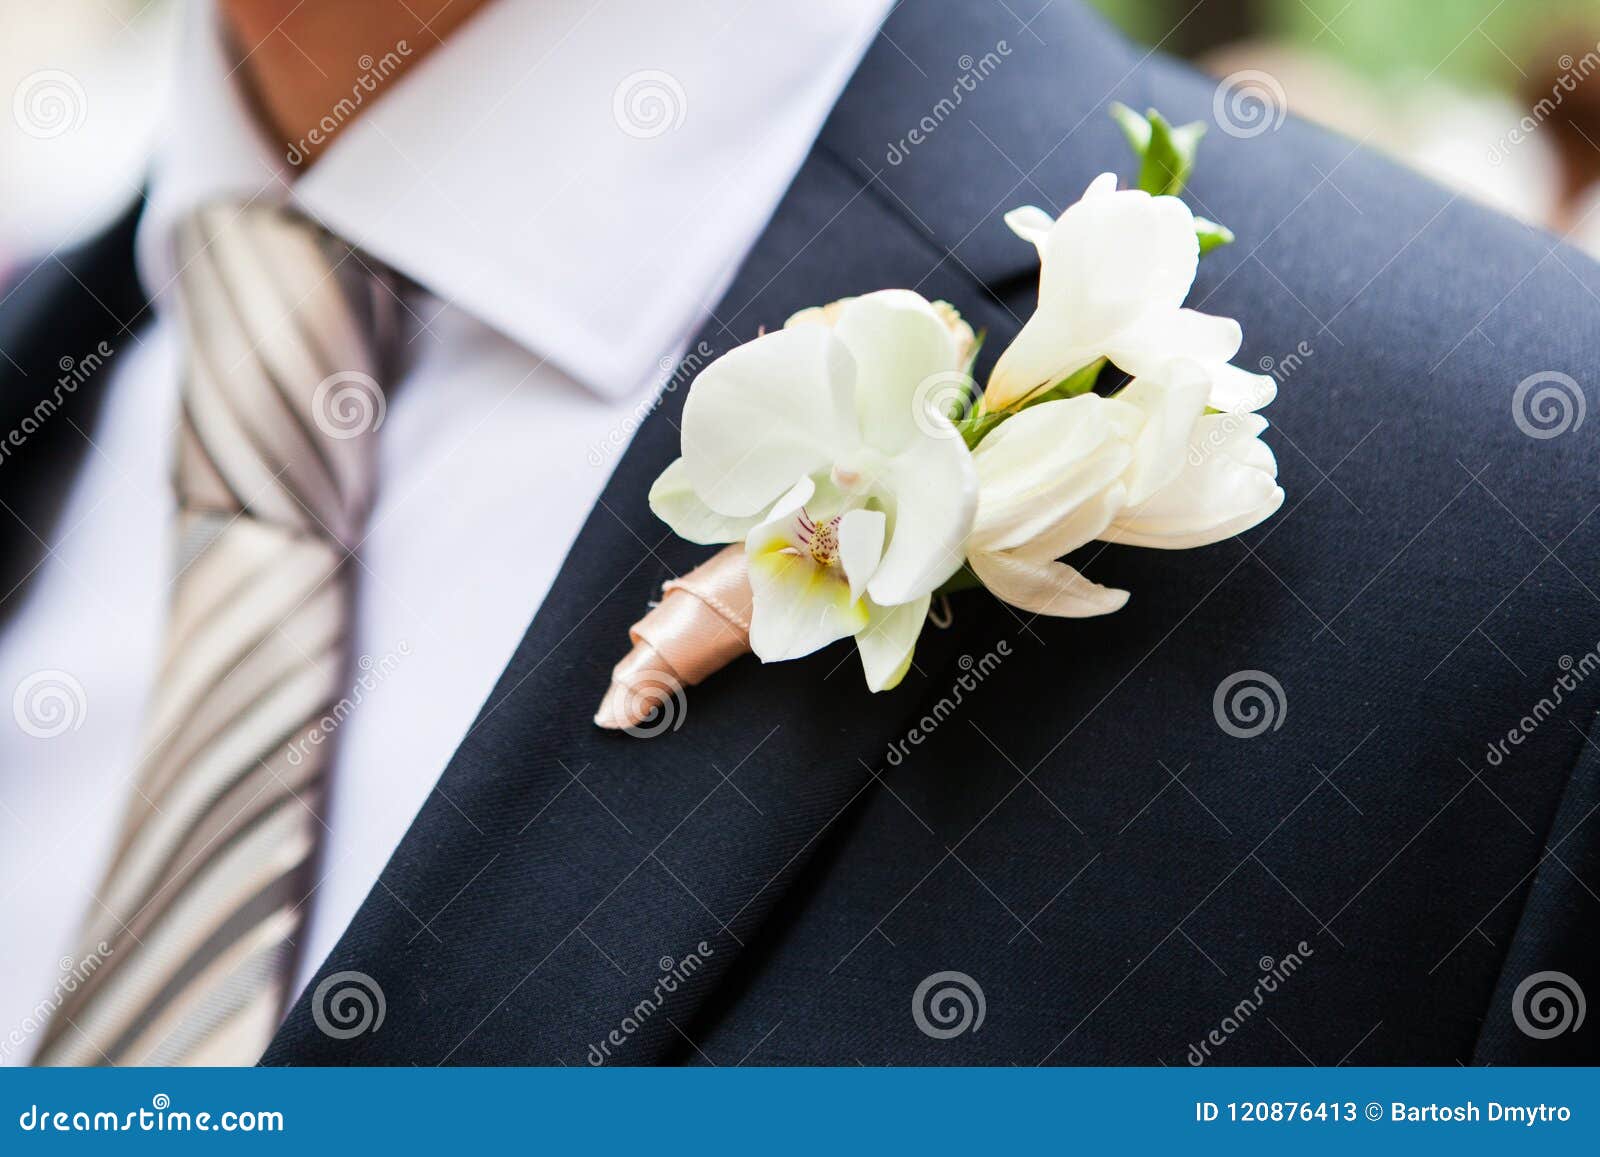 Boutonniere On The Lapel Of The Groom Stock Image Image Of Coat Macro 120876413